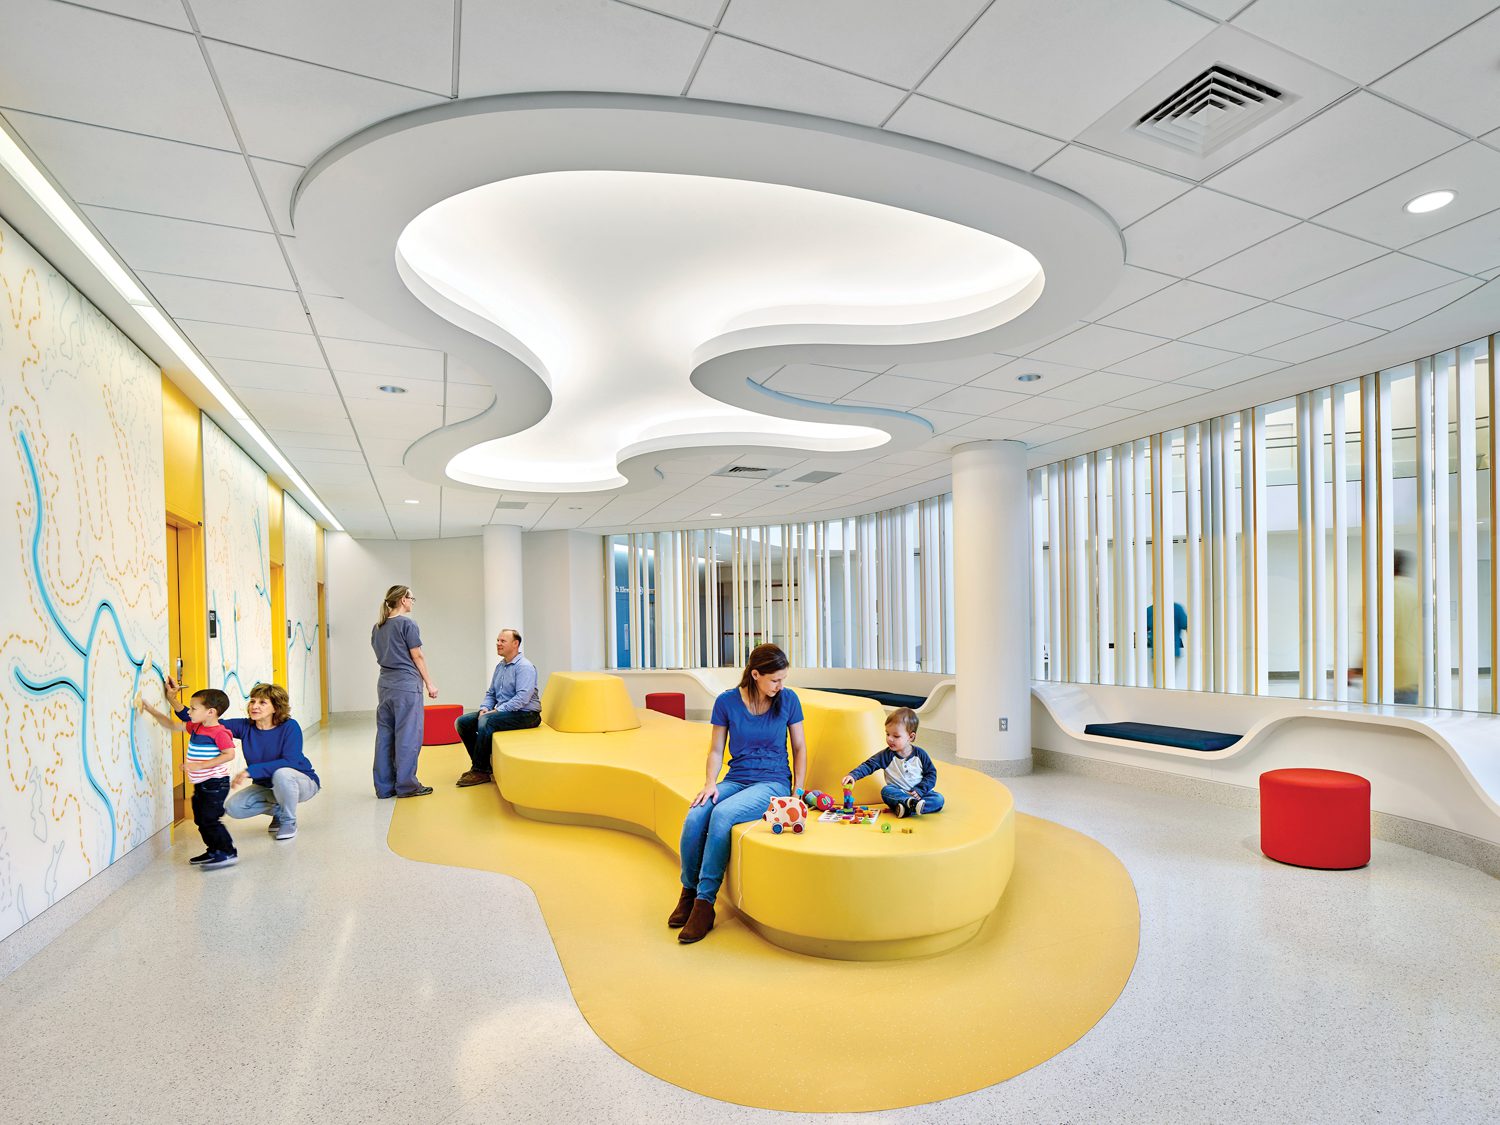 Yellow curved couch beneath a similarly shaped illuminated pattern on the ceiling above in University of Virginia hospital expansion, Charlottesville, by Perkins&Will.